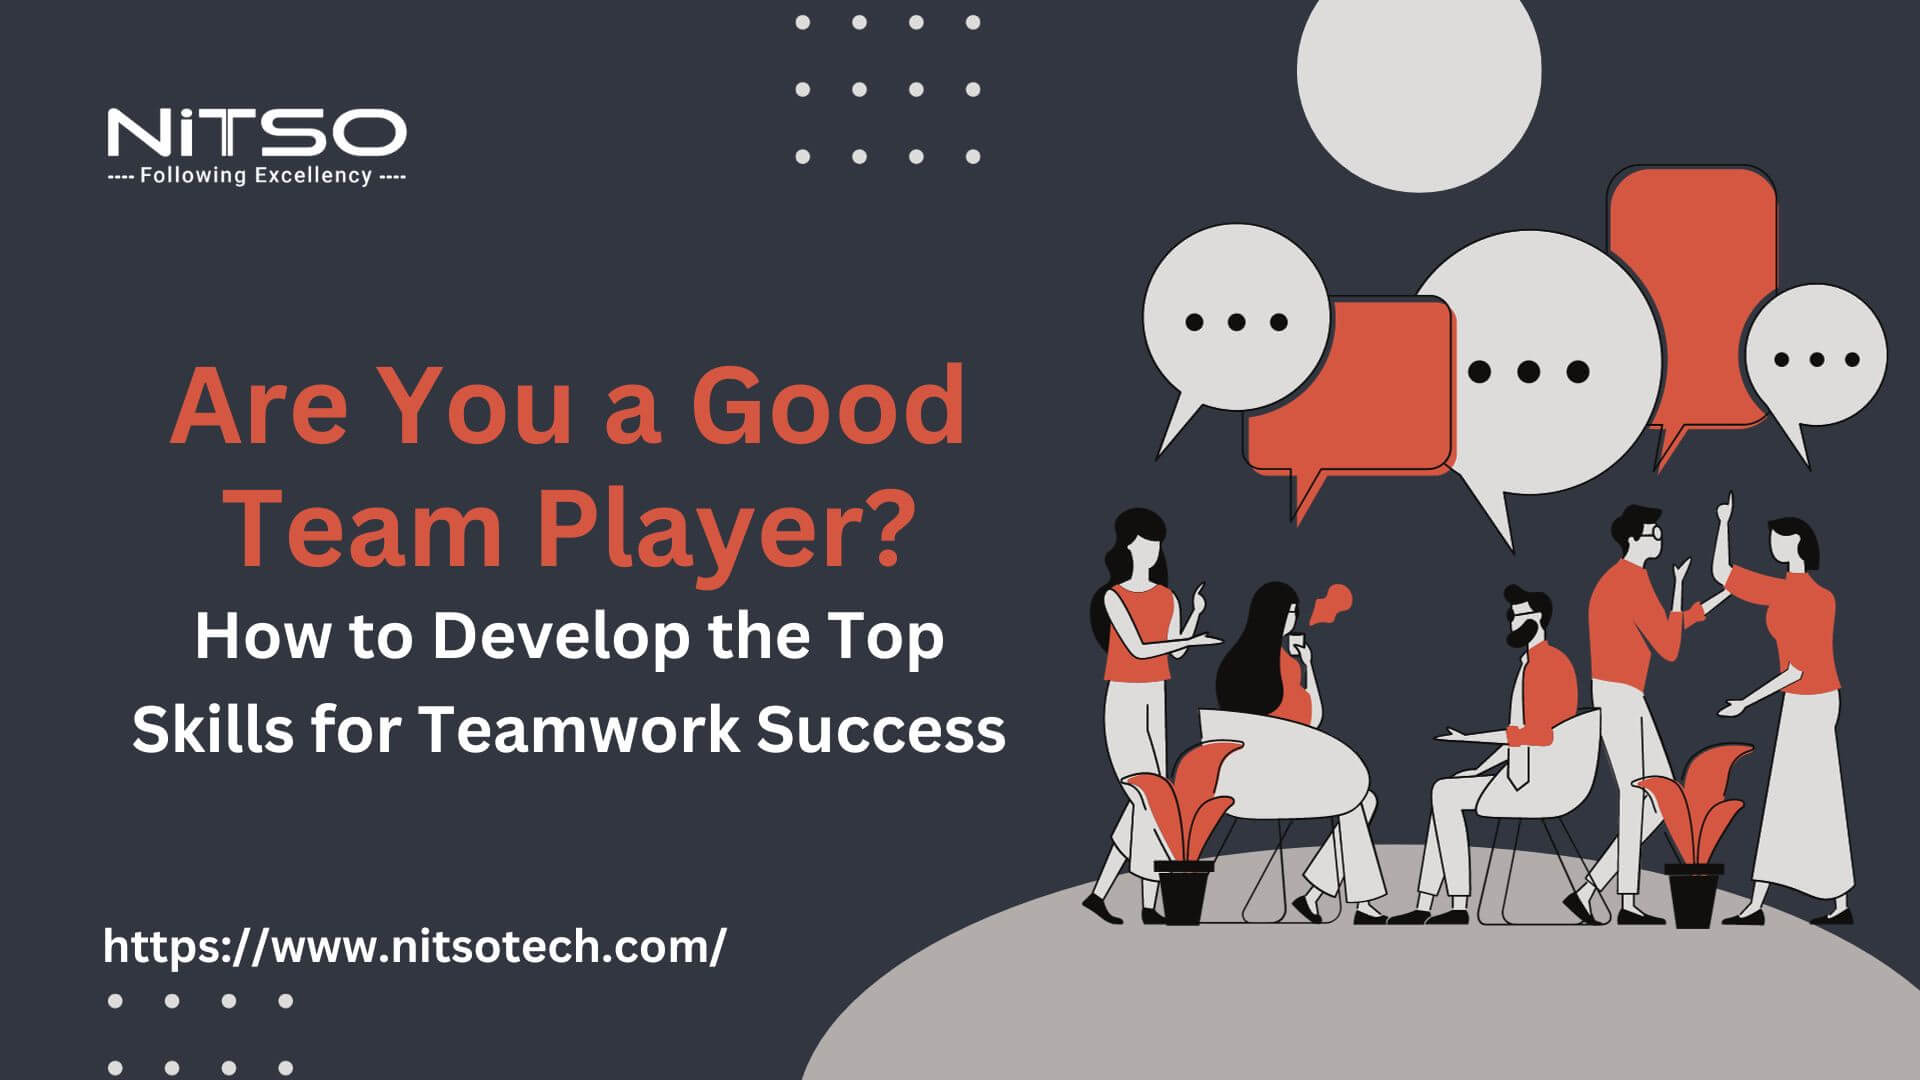 6 Main Qualities that Make Someone a Good Team Player